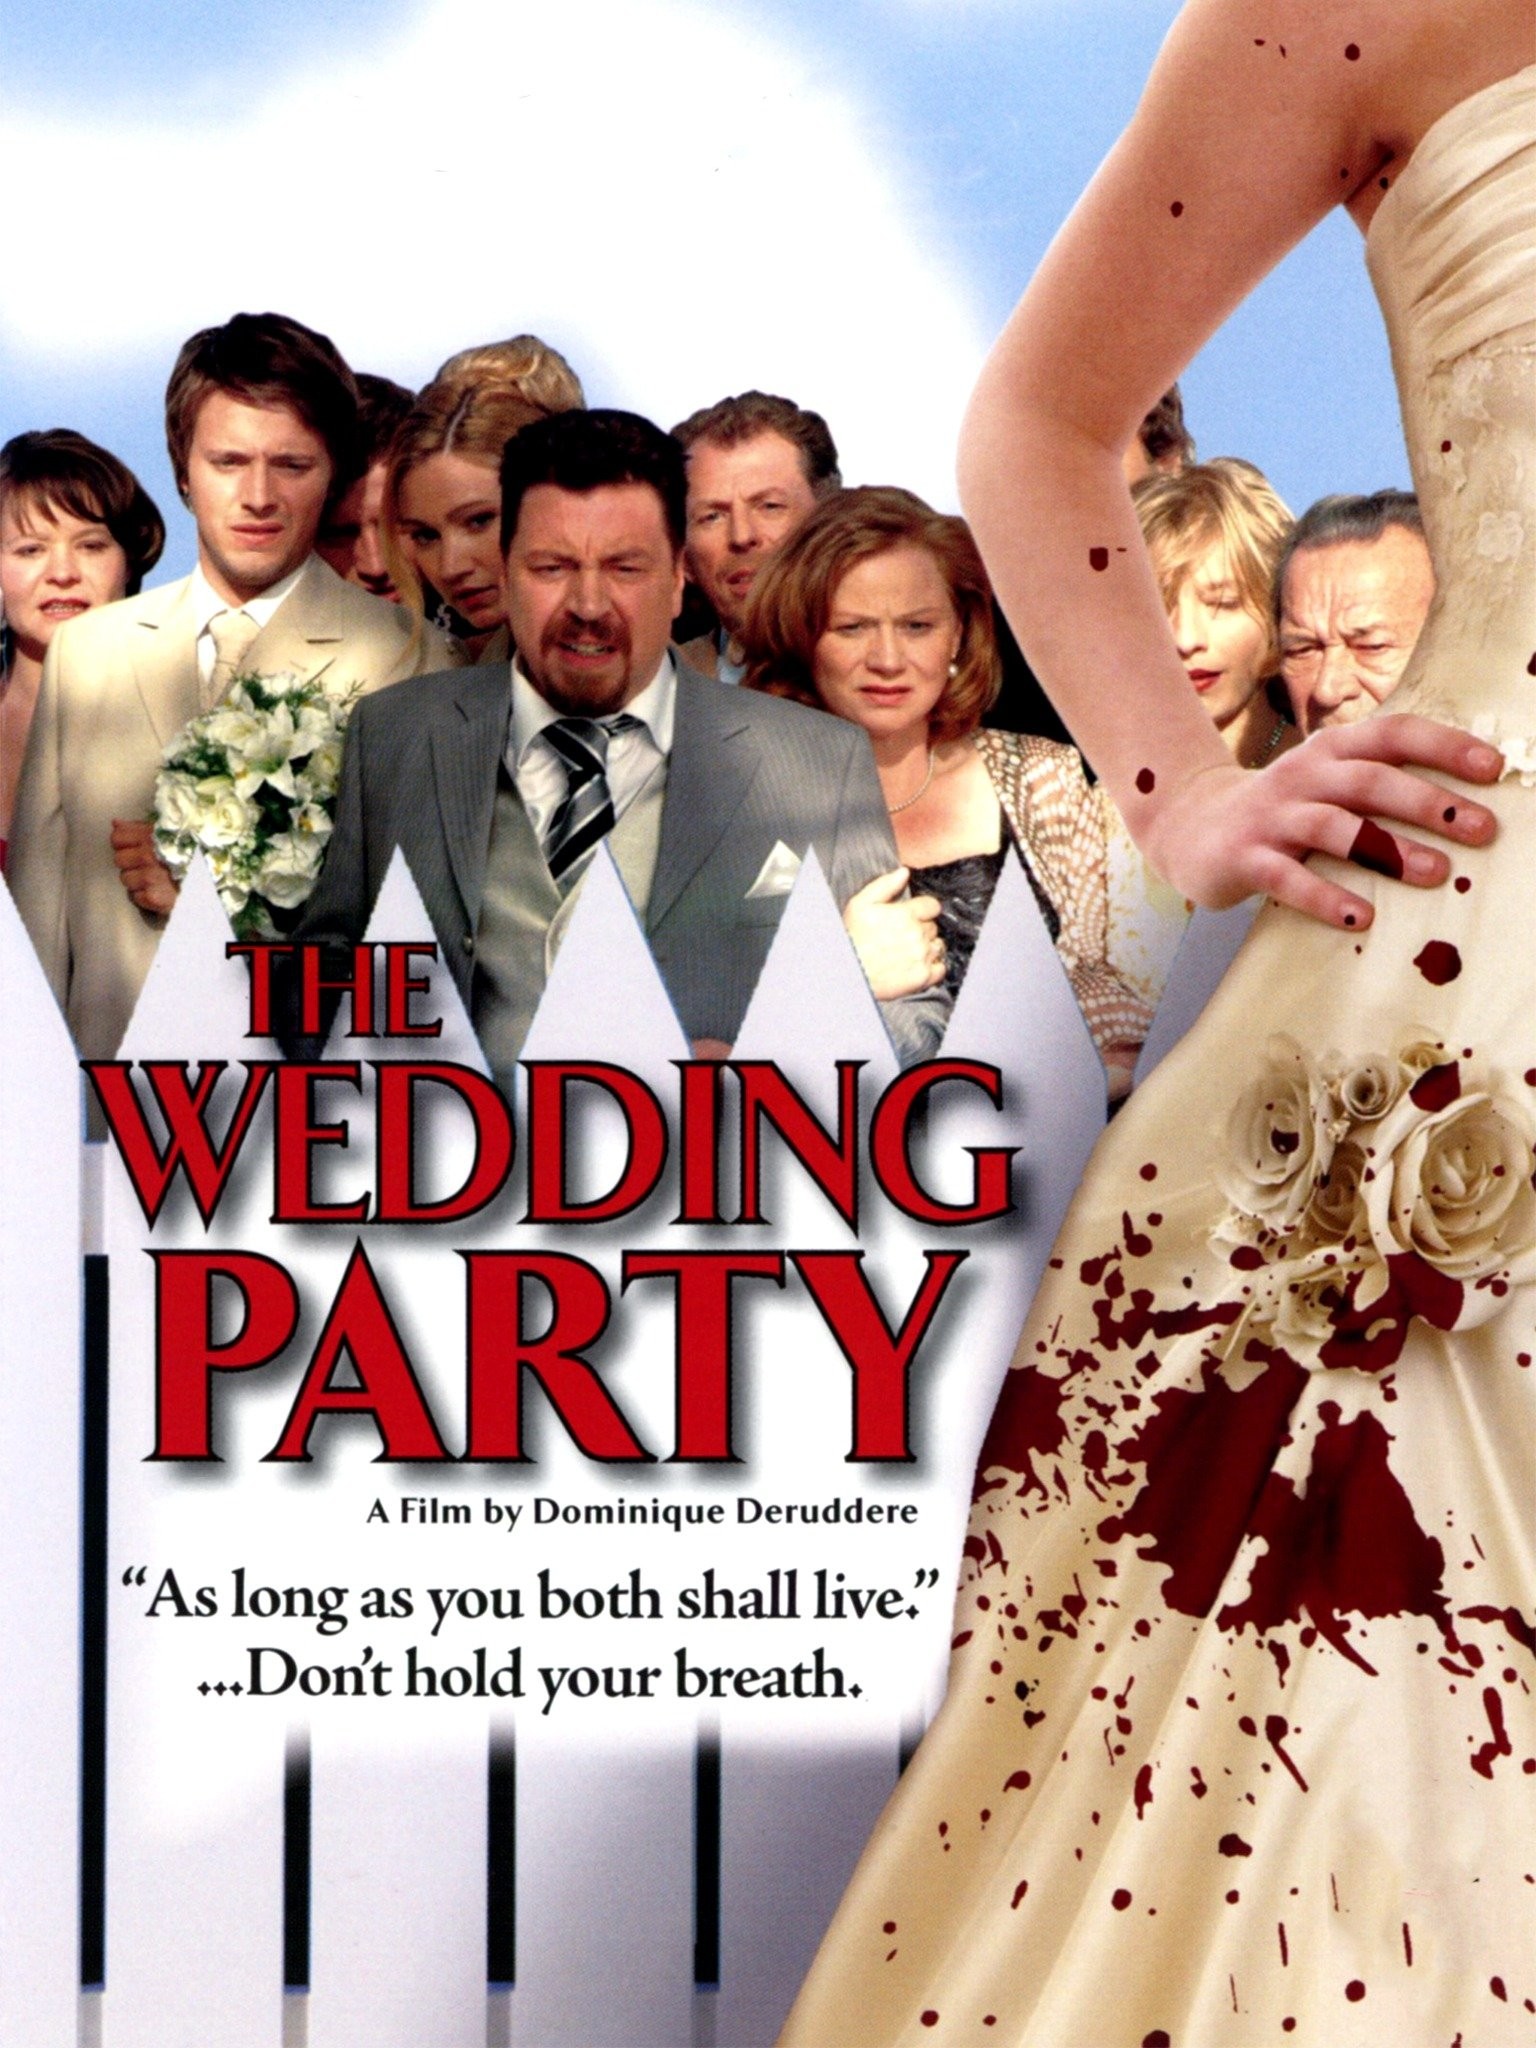 The Wedding Party (2016 film) - Wikipedia